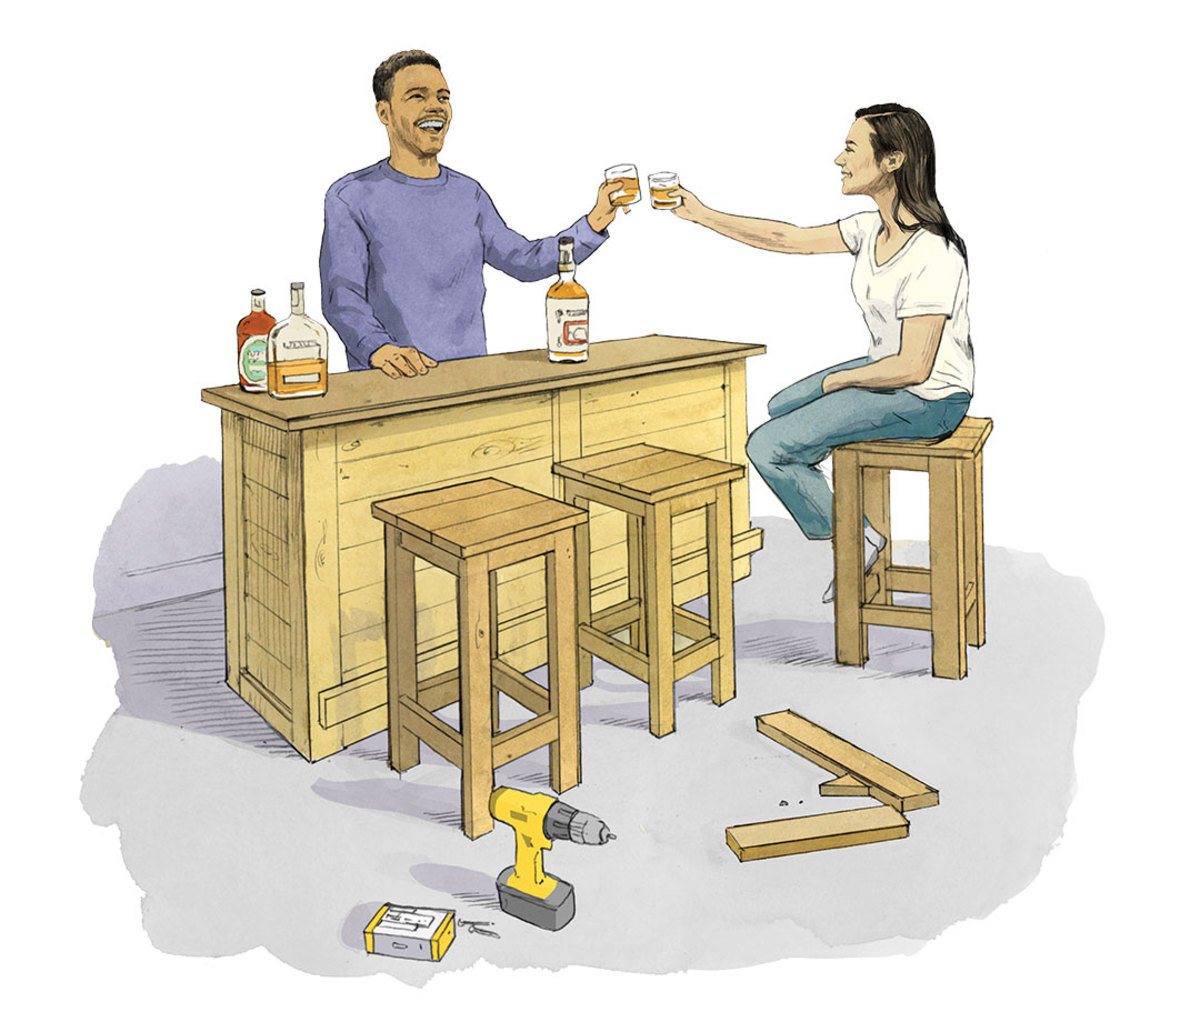 Illustration of two people at homemade bar